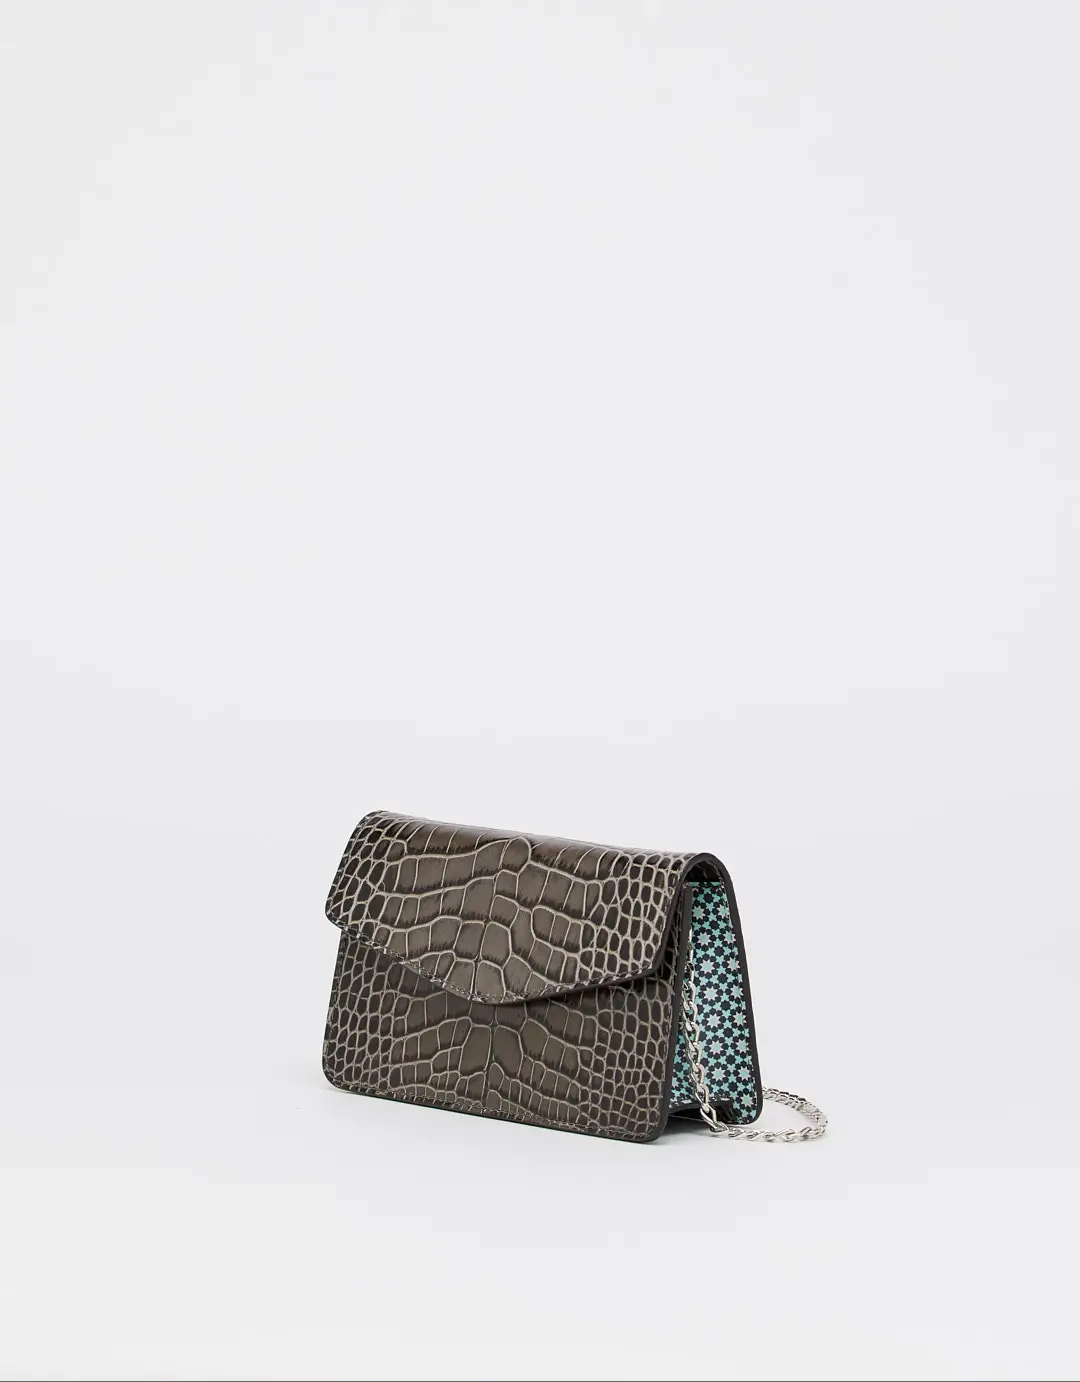 This stylish small bag is made from calf leather and high quality materials. The mosaic patterns on the sides is designed to add a touch of luxury and elegance. The Croco always gives the feeling that you are wearing something valuable.Thanks to a removable silver-tone chain, it also offers a variety of carry options: on the shoulder, across the body or in the hand. This bag is the perfect accessory for the modern woman who wants to add a touch of elegance to her look.